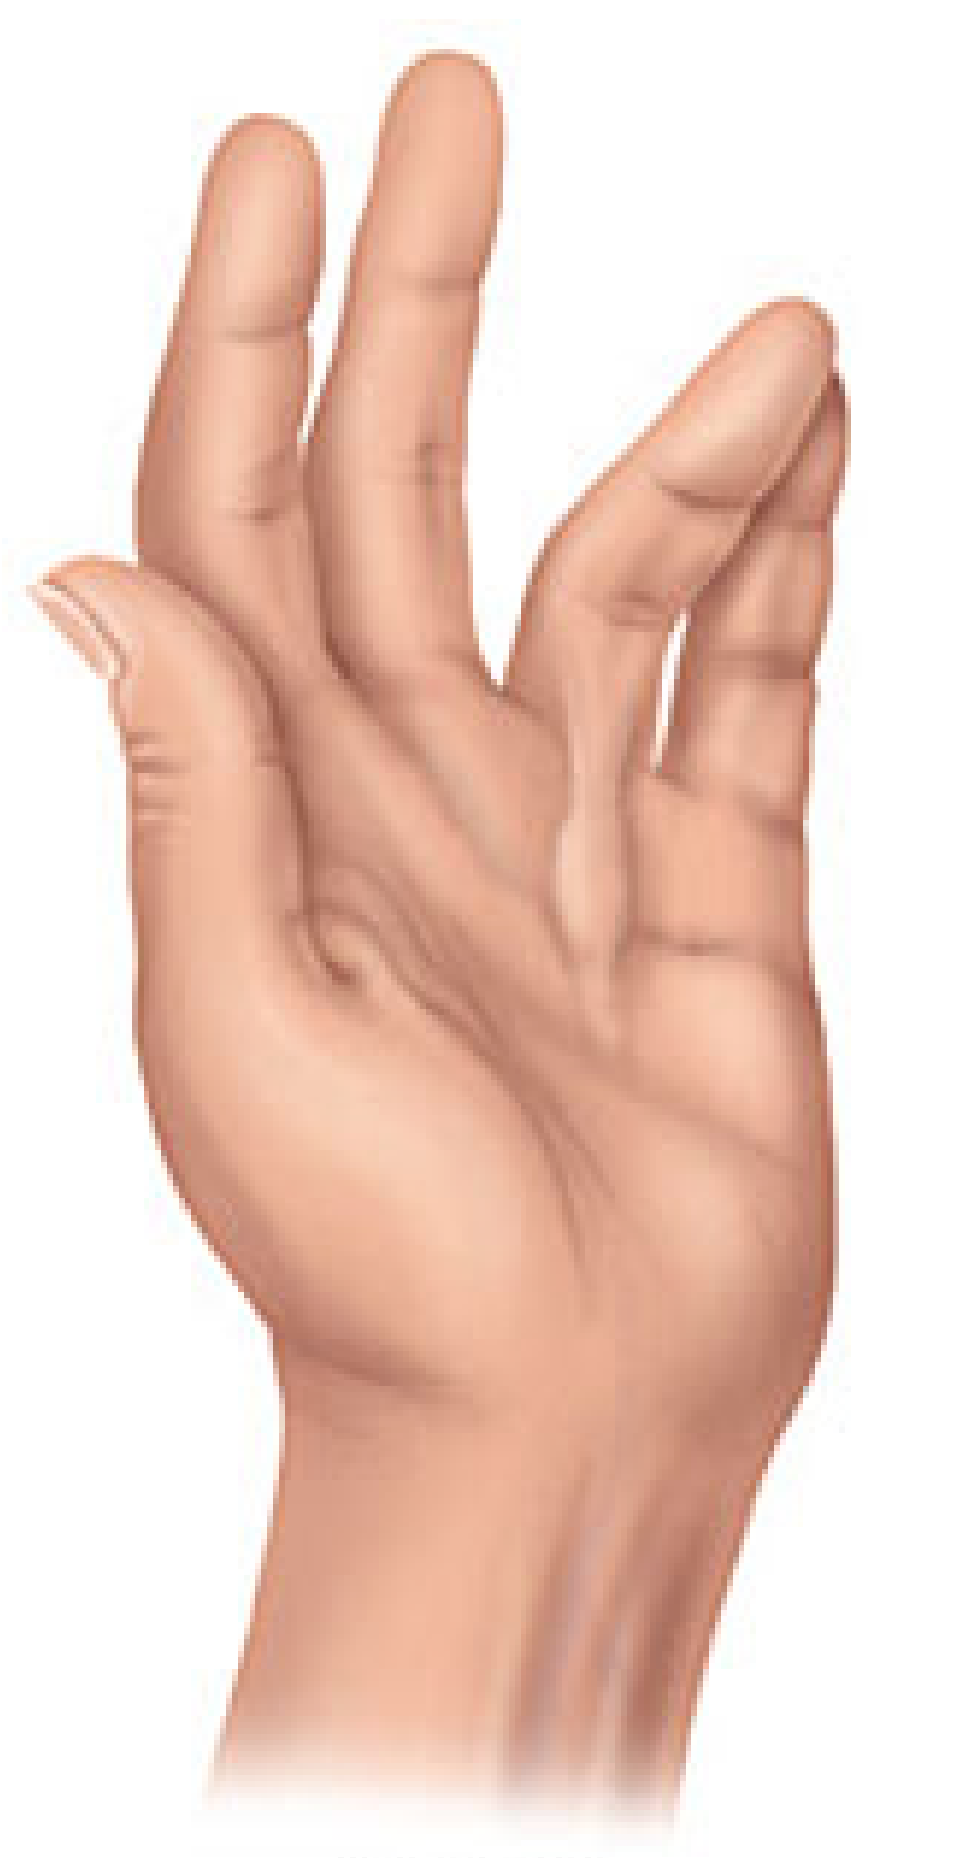 Dupuytrens contracture grade 2